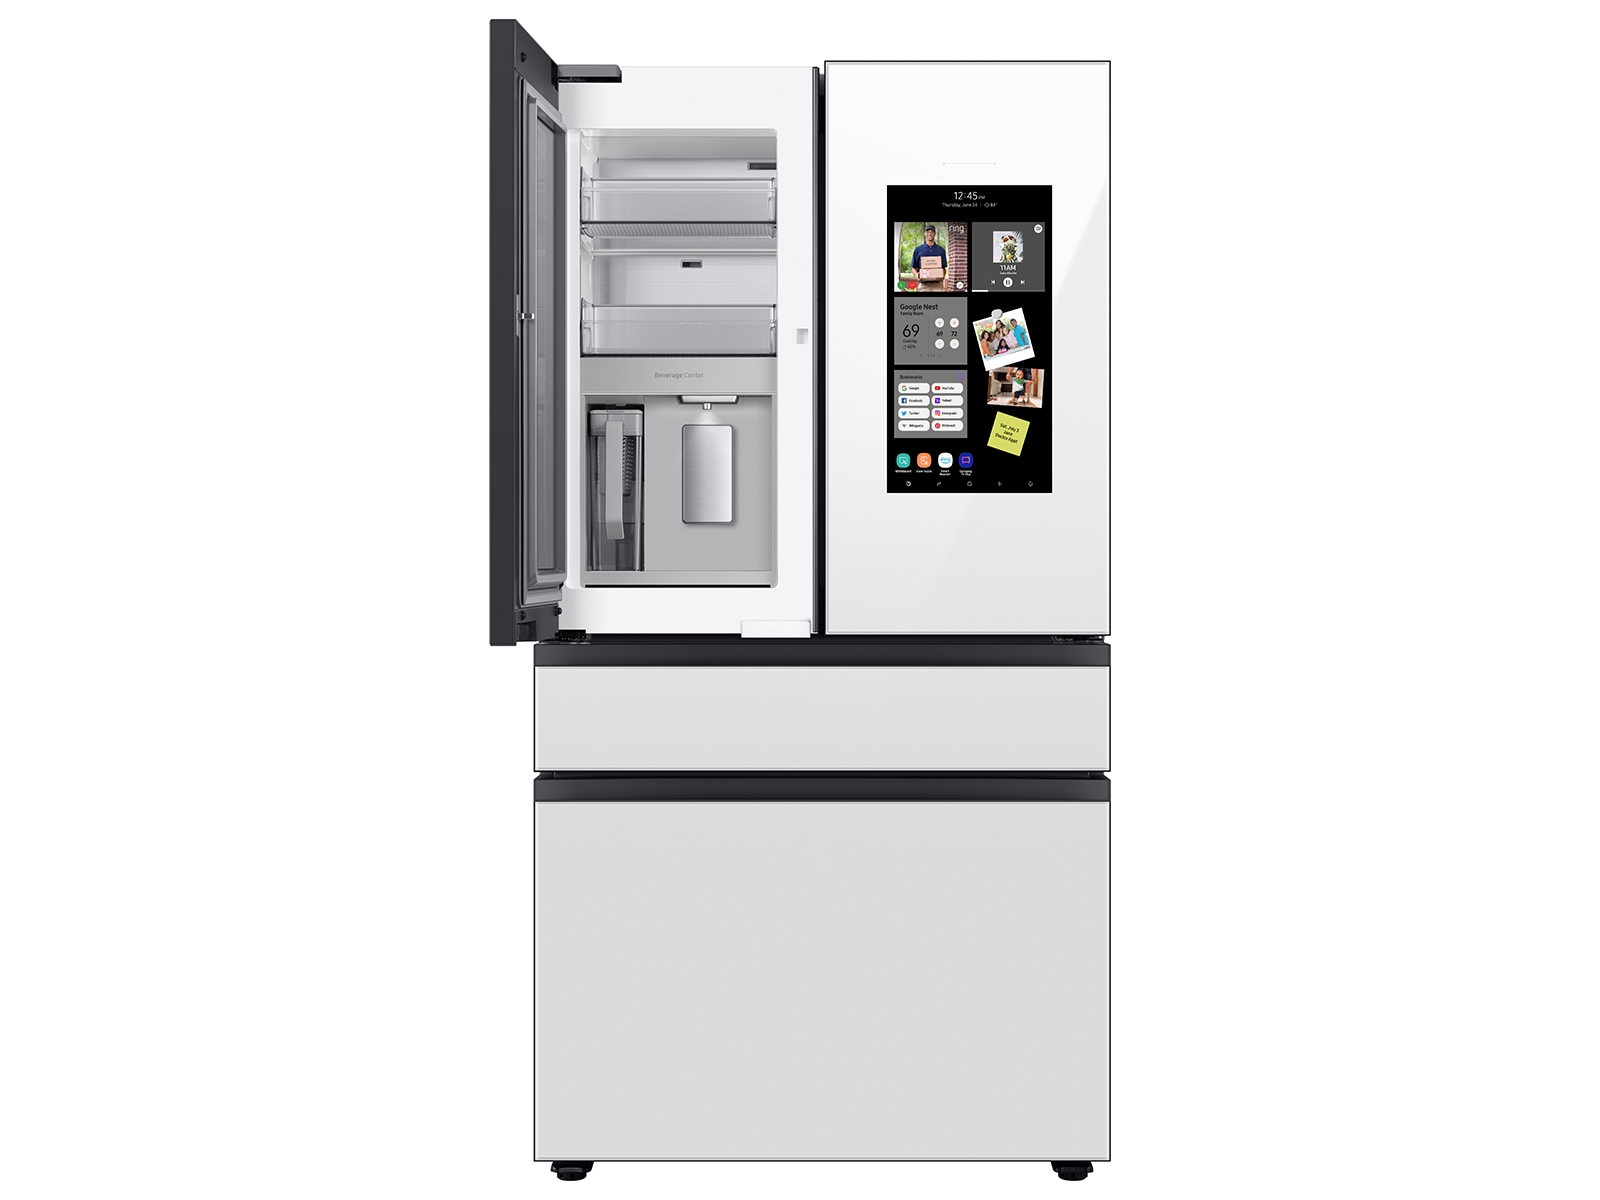 Out of milk? Just chat to your LG fridge and it'll order some more